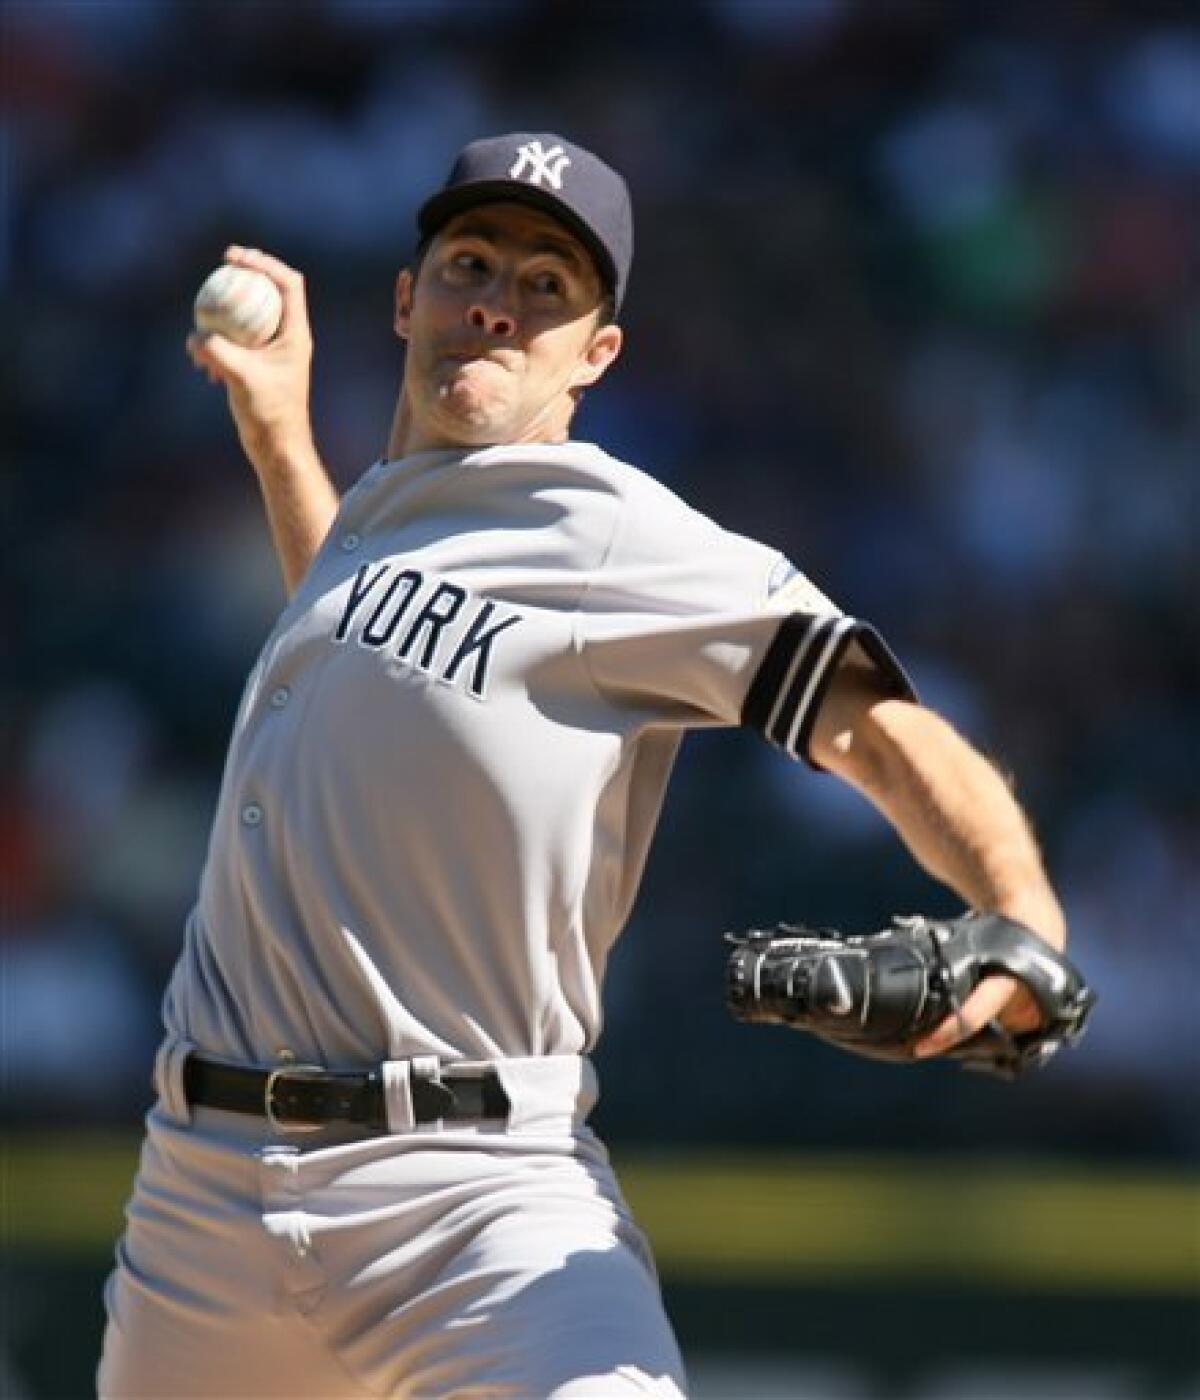 Mussina Close to Making Retirement Official - The New York Times